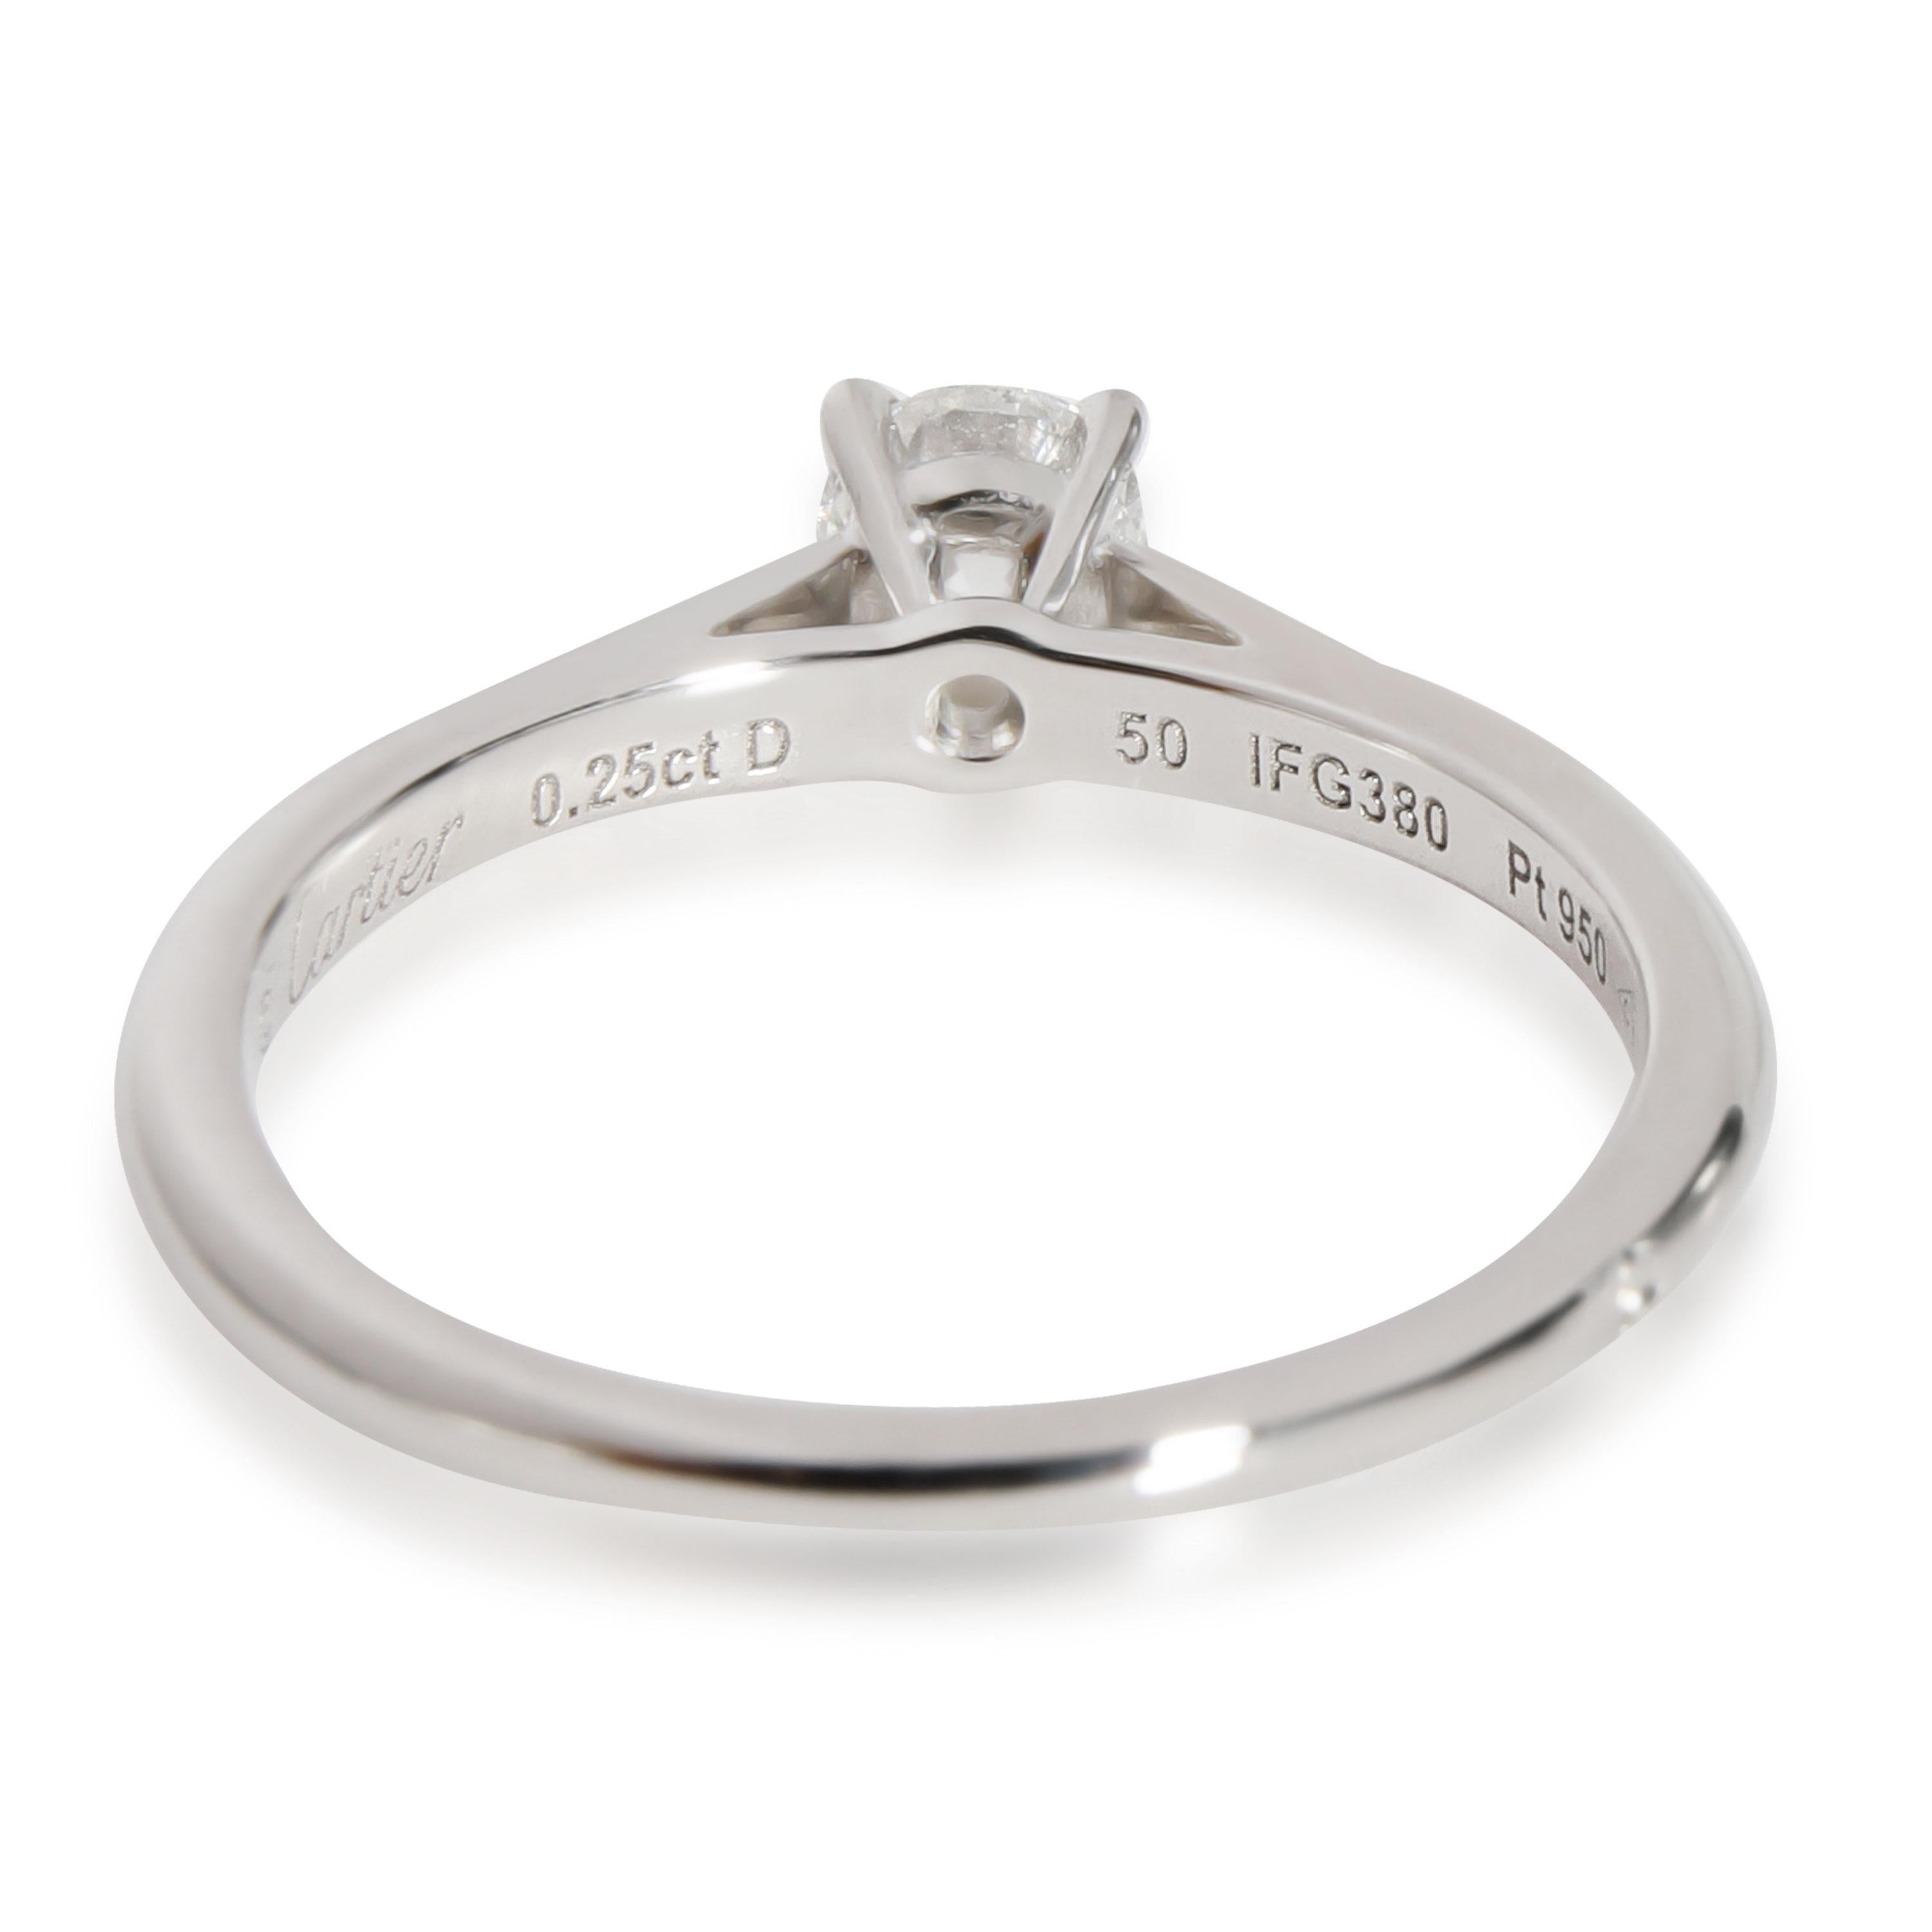 Cartier 1895 Diamond Solitaire Engagement Ring in Platinum E IF 0.25 CTW

PRIMARY DETAILS
SKU: 112530
Listing Title: Cartier 1895 Diamond Solitaire Engagement Ring in Platinum E IF 0.25 CTW
Condition Description: Retails for 3,400 USD. In excellent